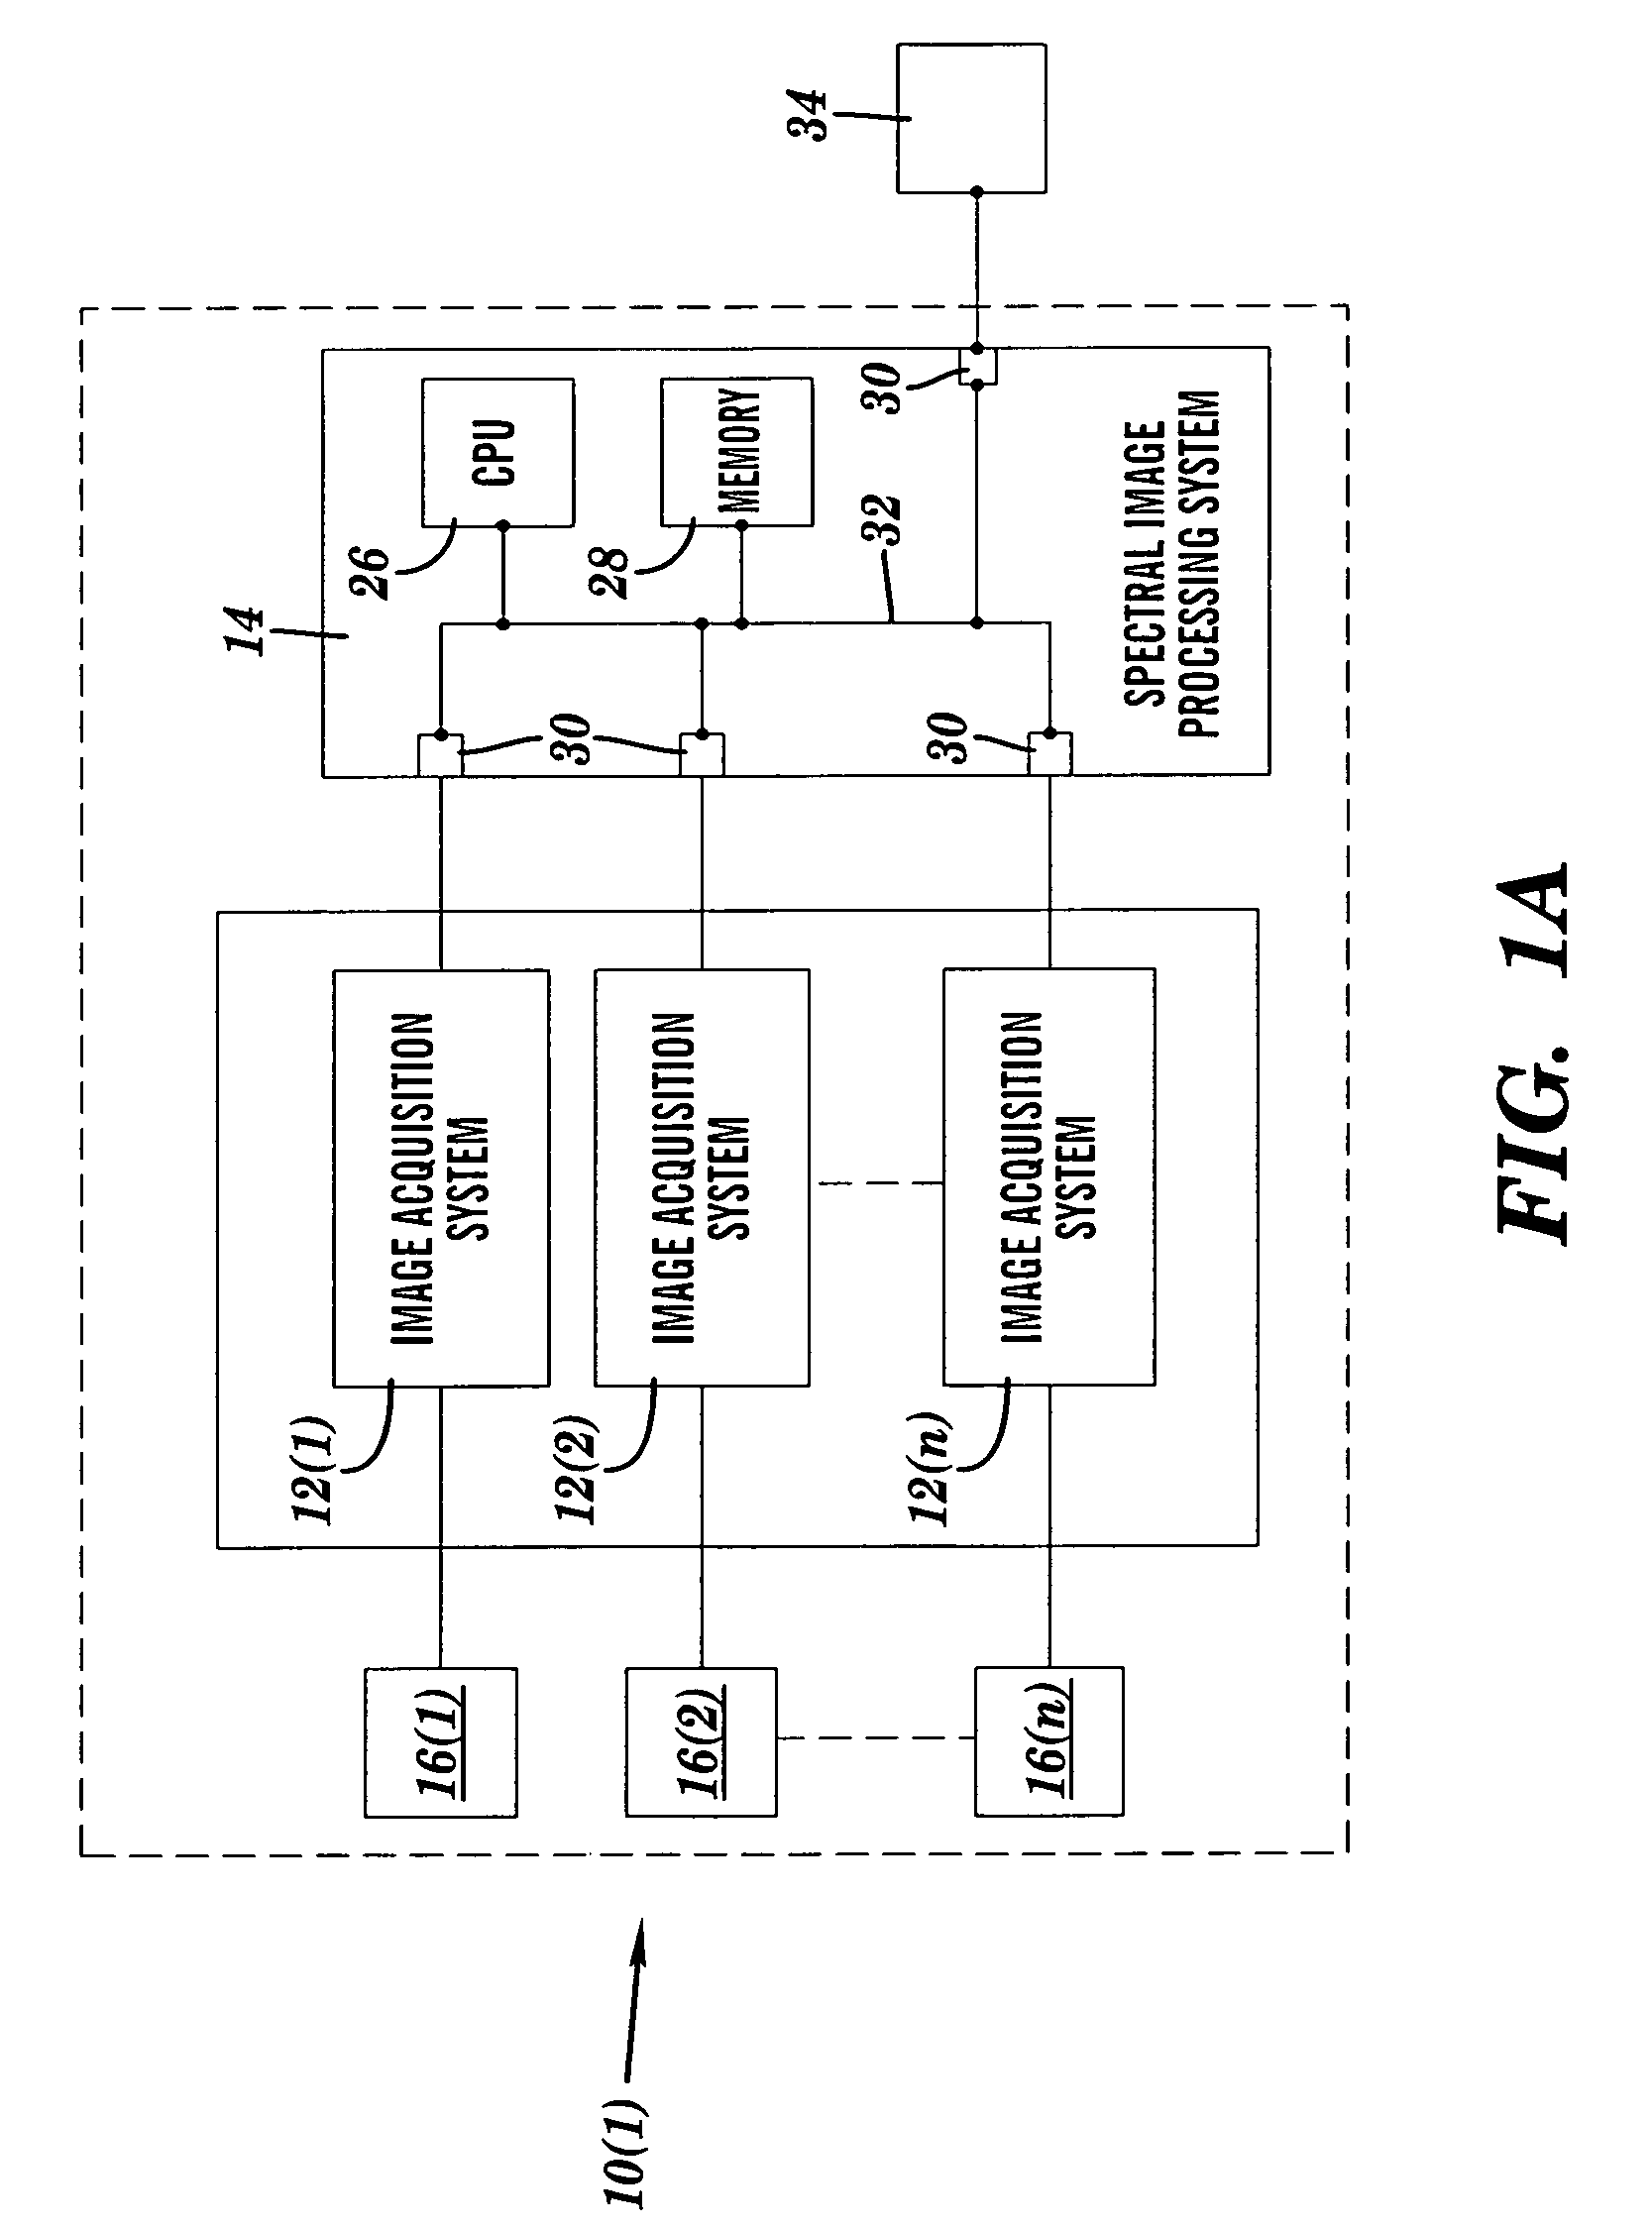 System and method for scene image acquisition and spectral estimation using a wide-band multi-channel image capture